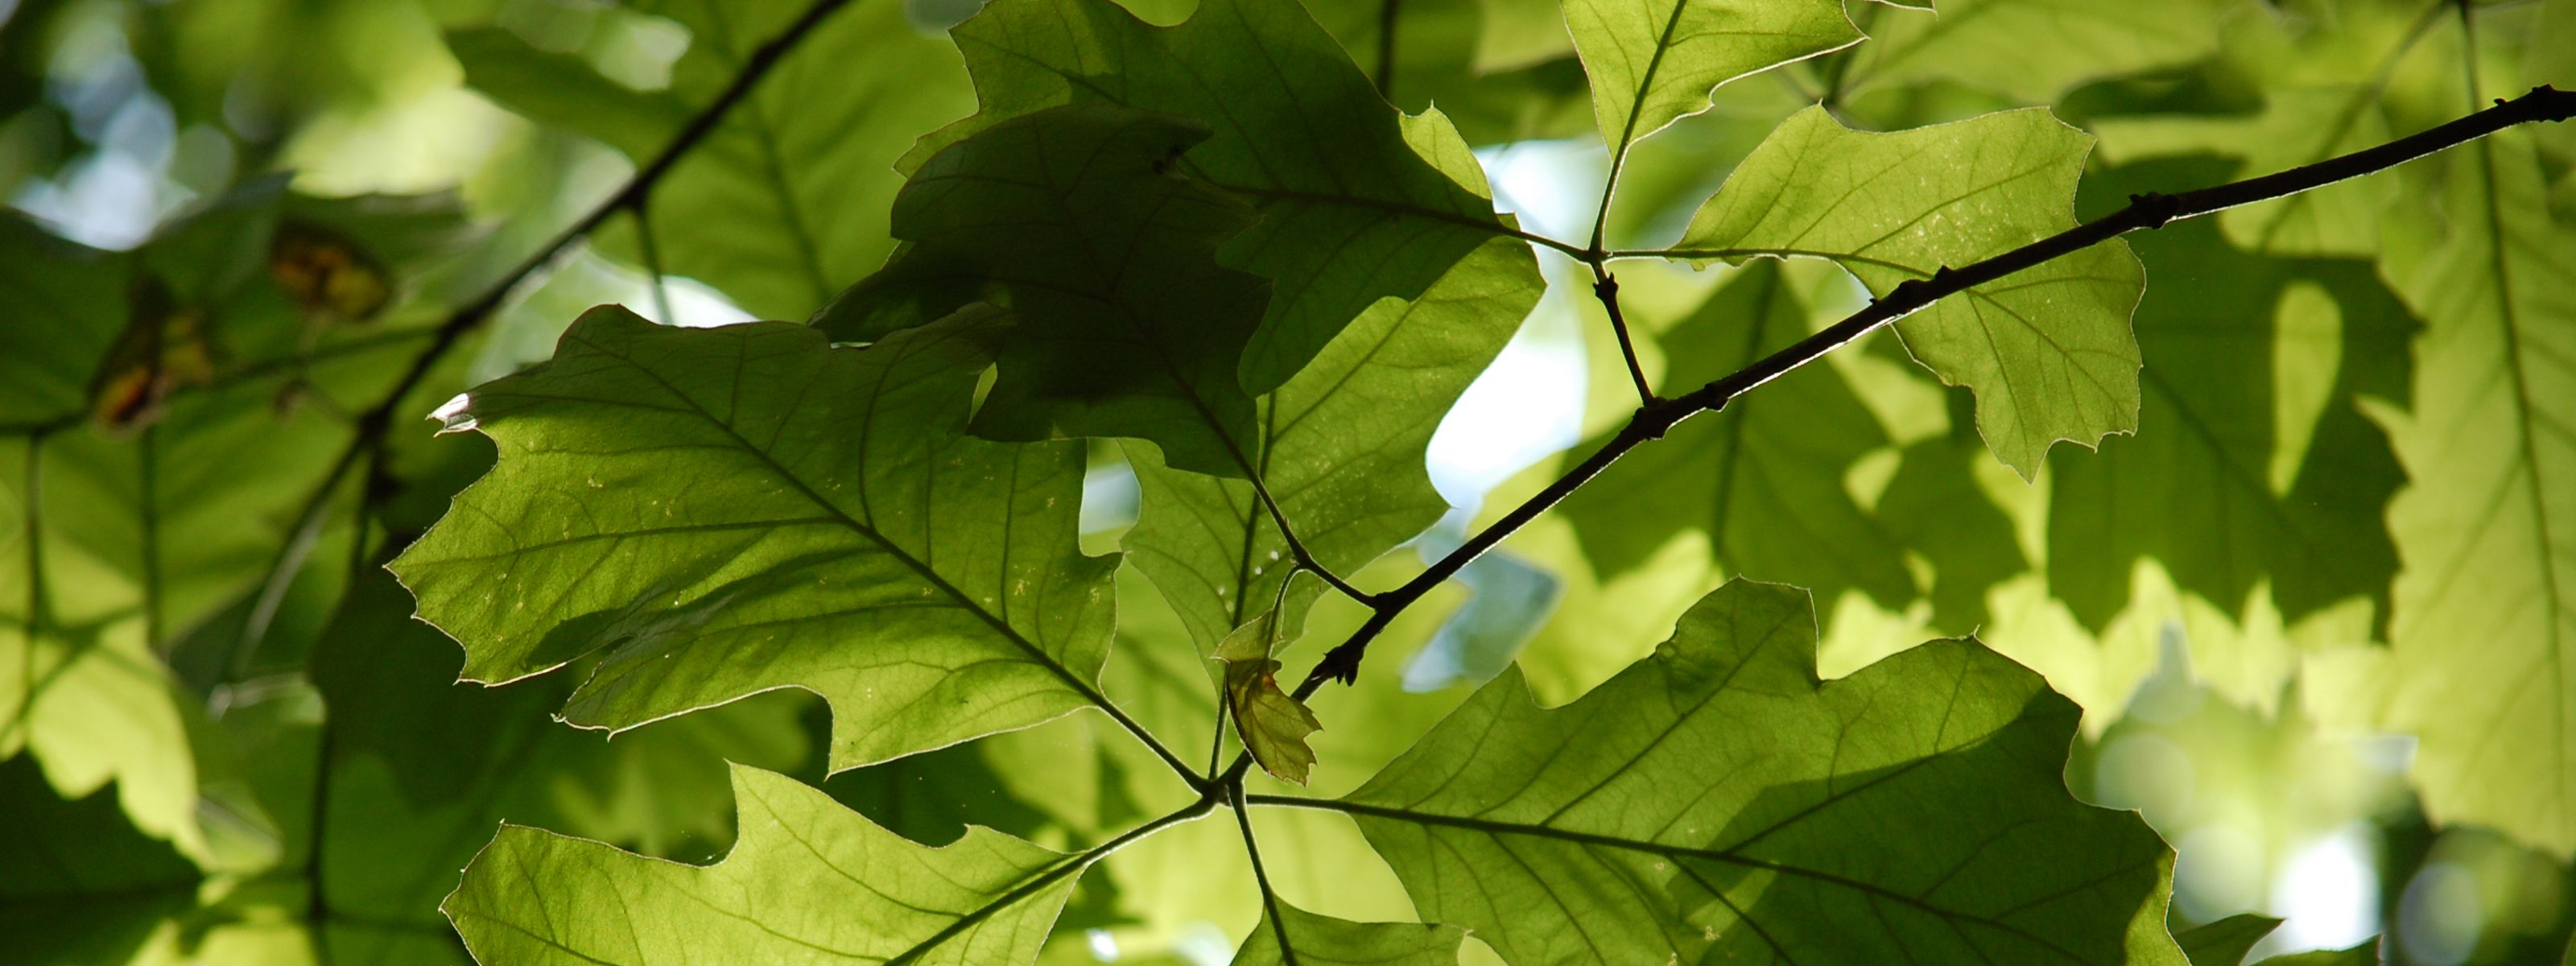 Several large oak leaves on a branch are backlit by the sun.